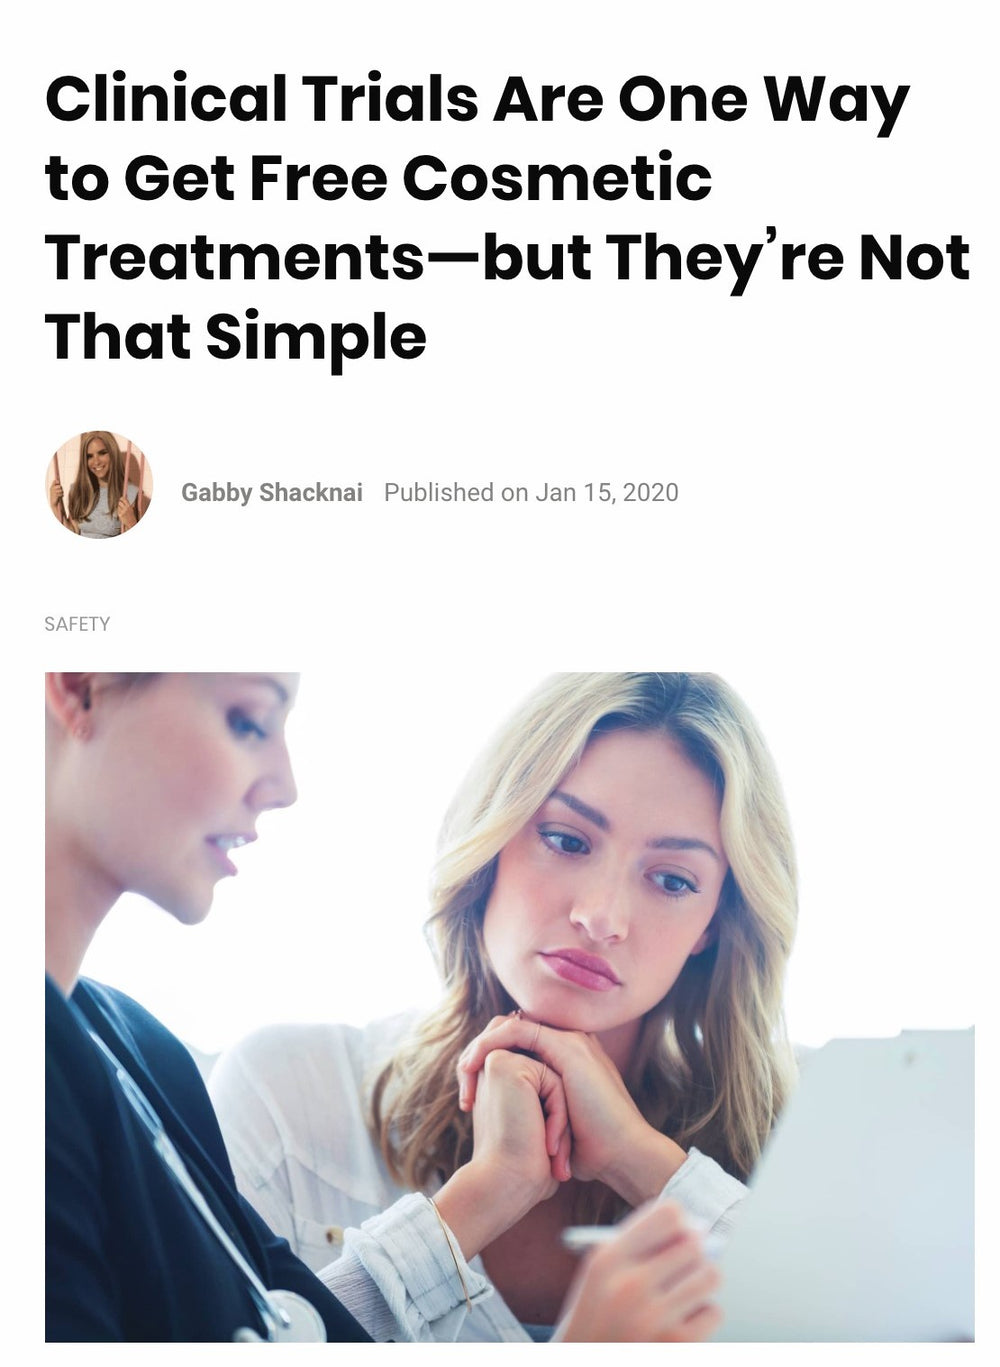 Real Self News: Clinical Trials Are One Way to Get Free Cosmetic Treatments—but They’re Not That Simple